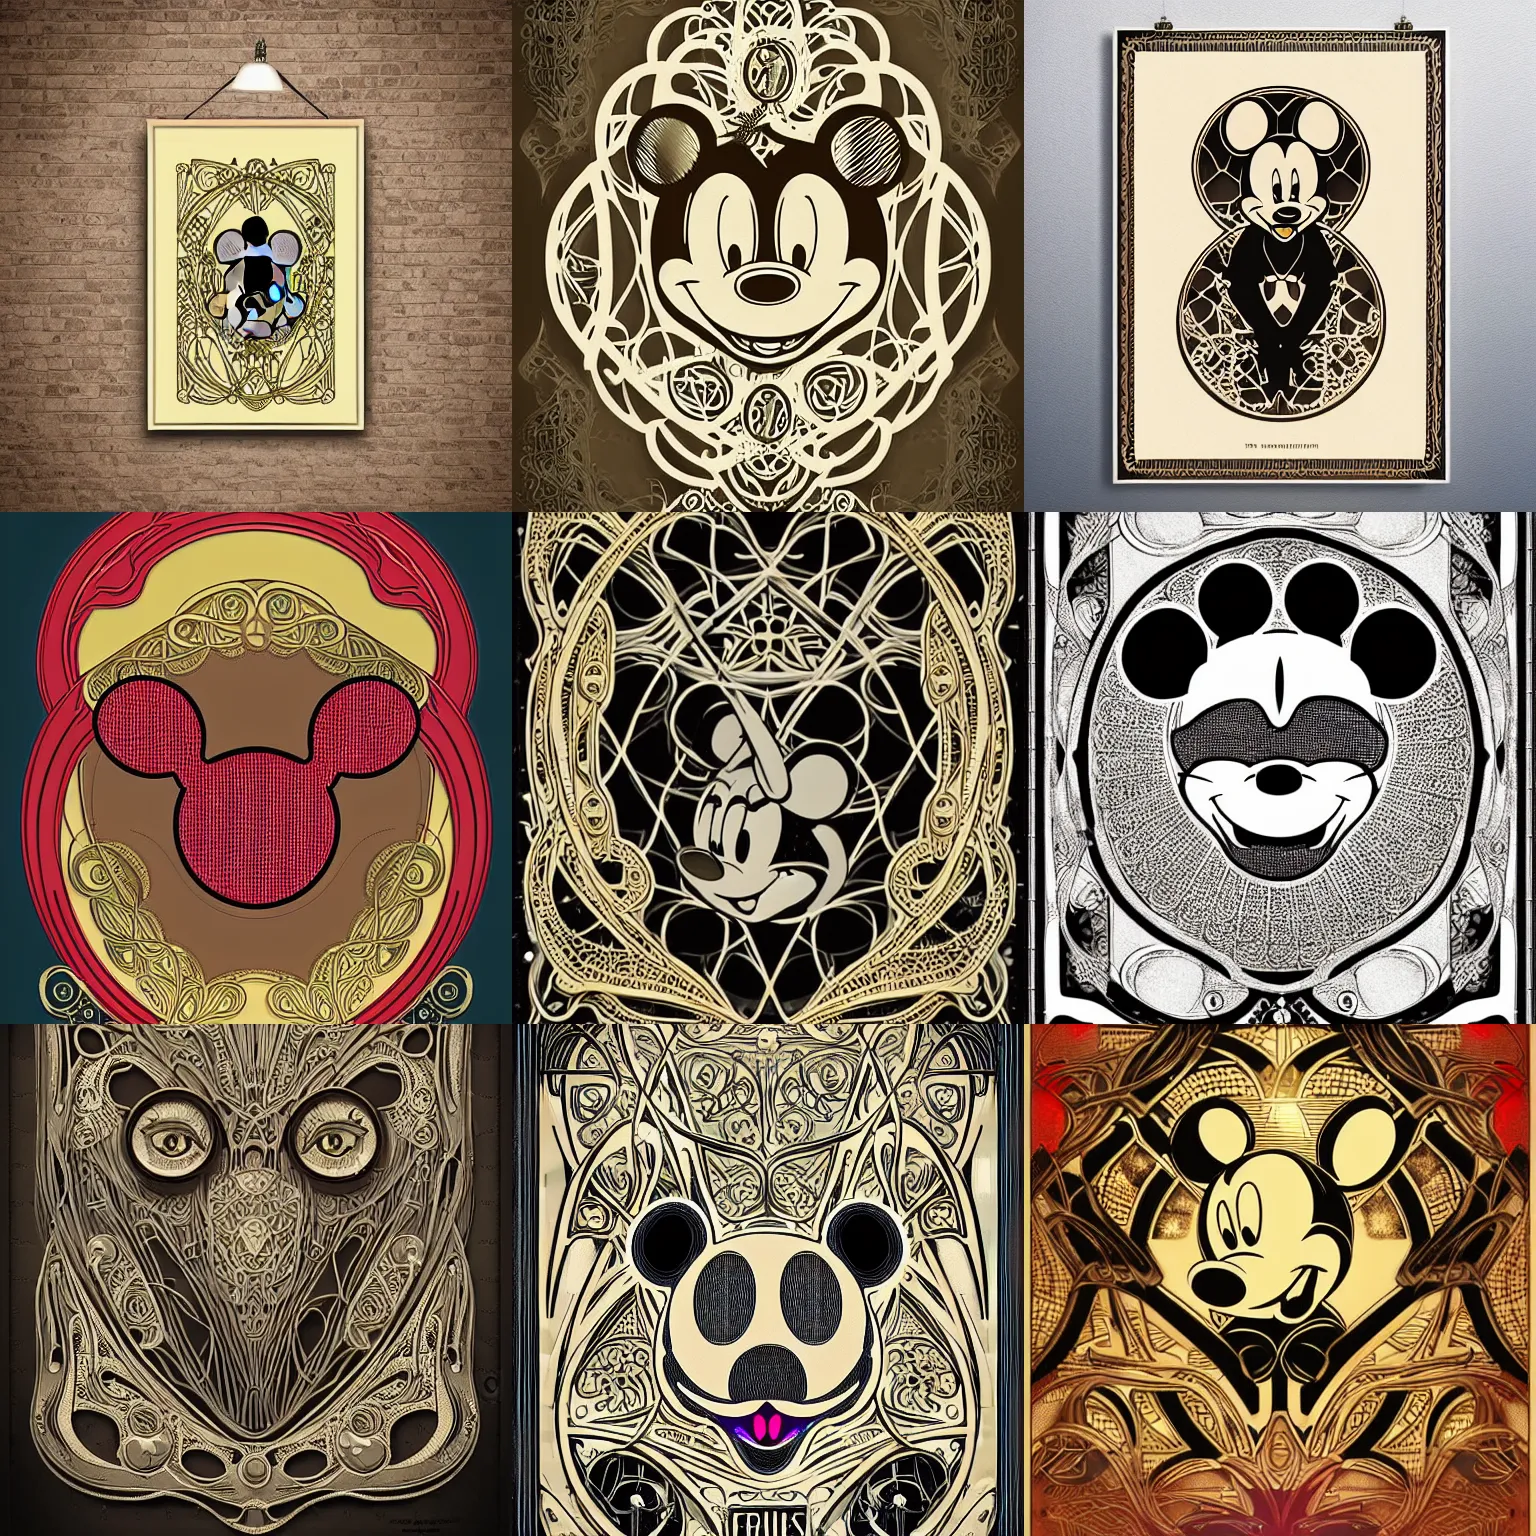 Prompt: ultra realistic illustration (((mickey mouse))) cyborg vintage art nouveau style poster, highly detailed filigree fretwork lacework